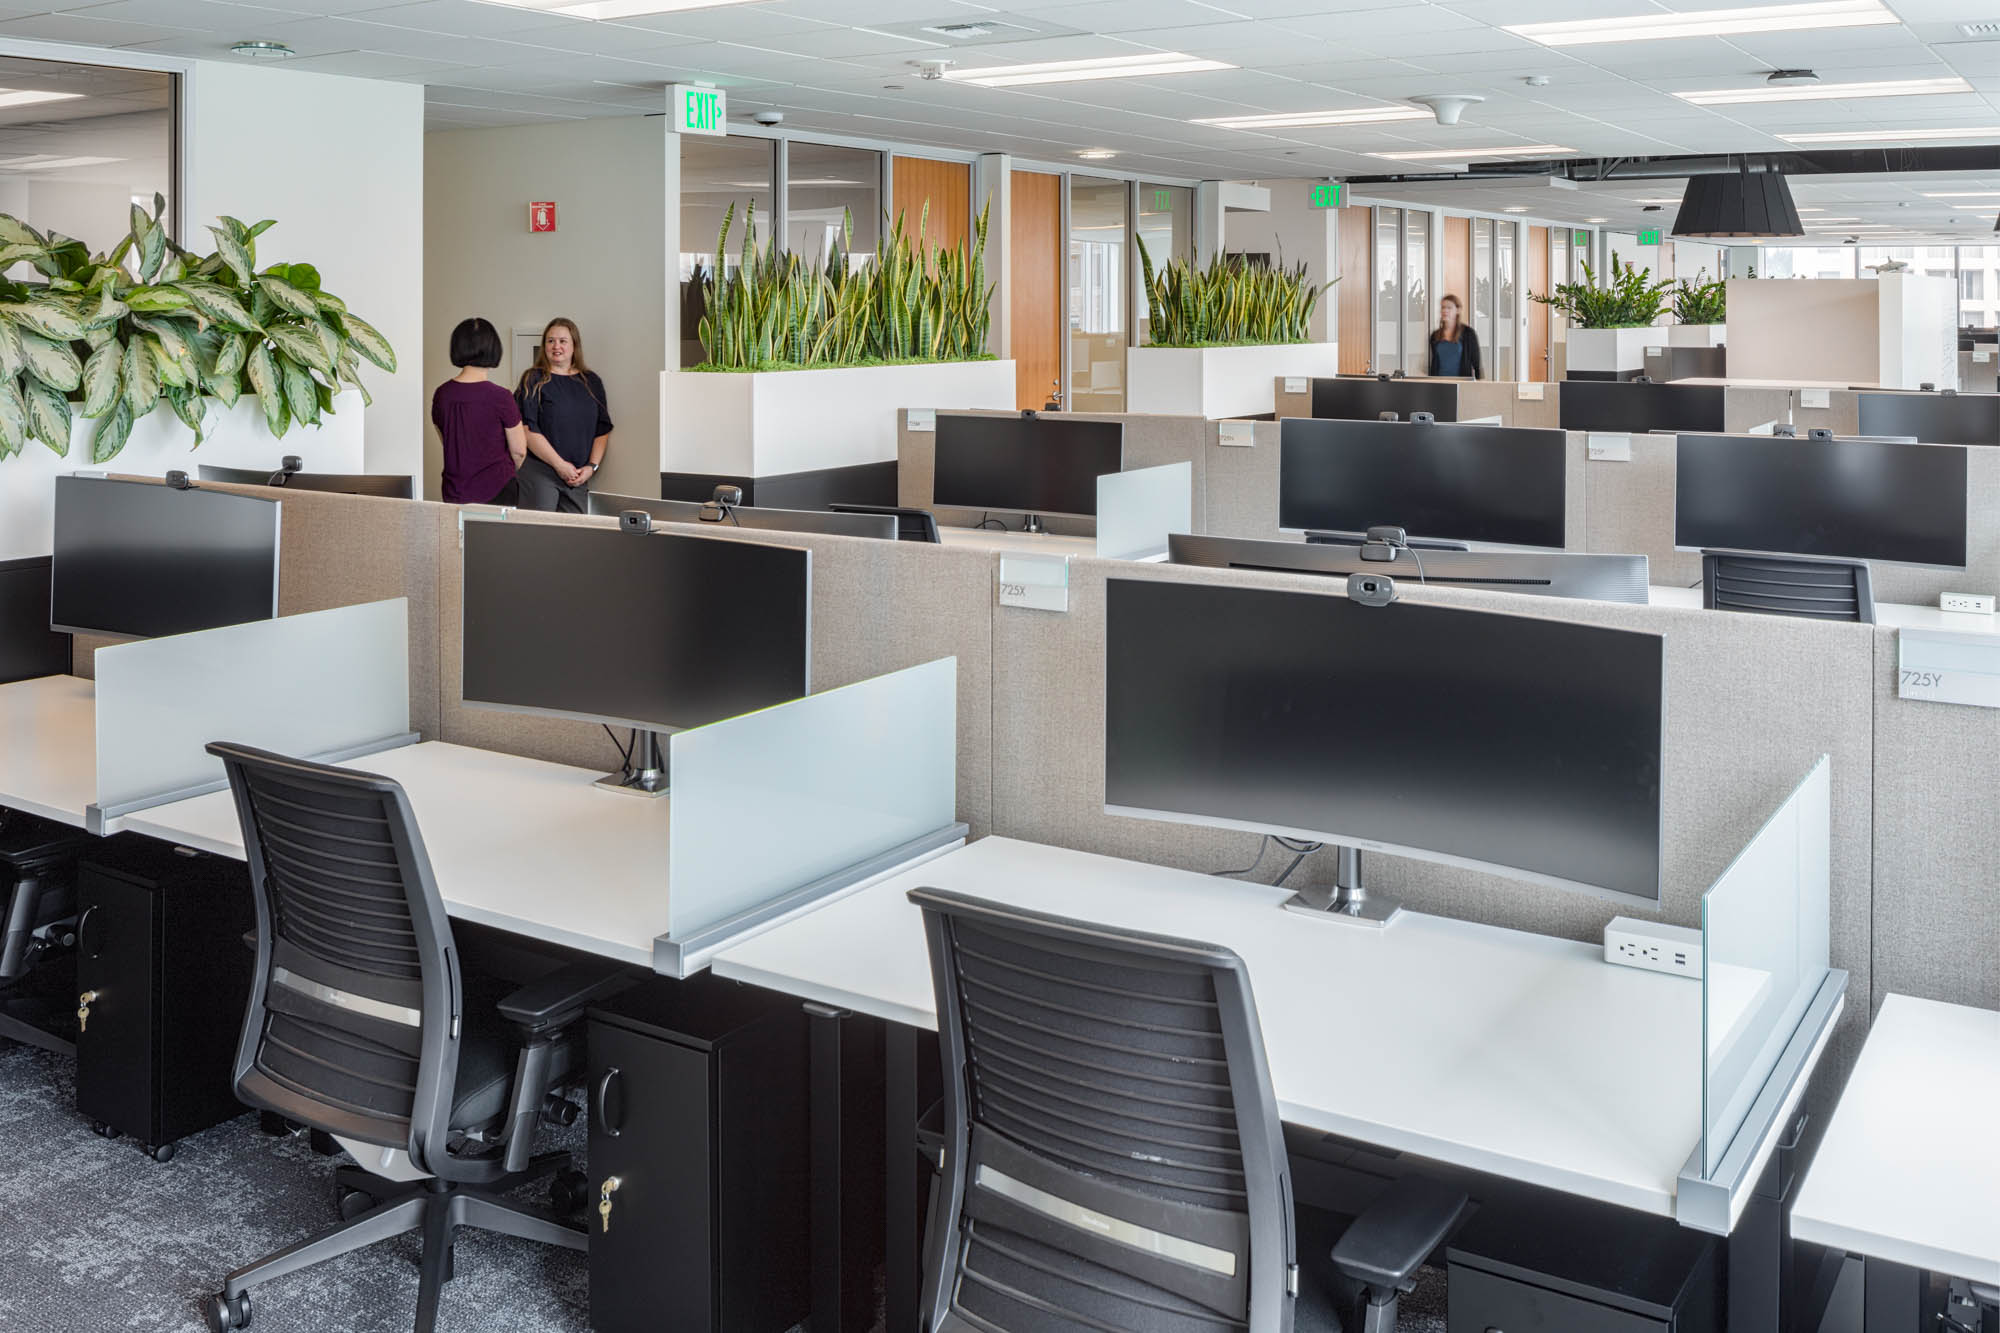 Open office and conference room spaces